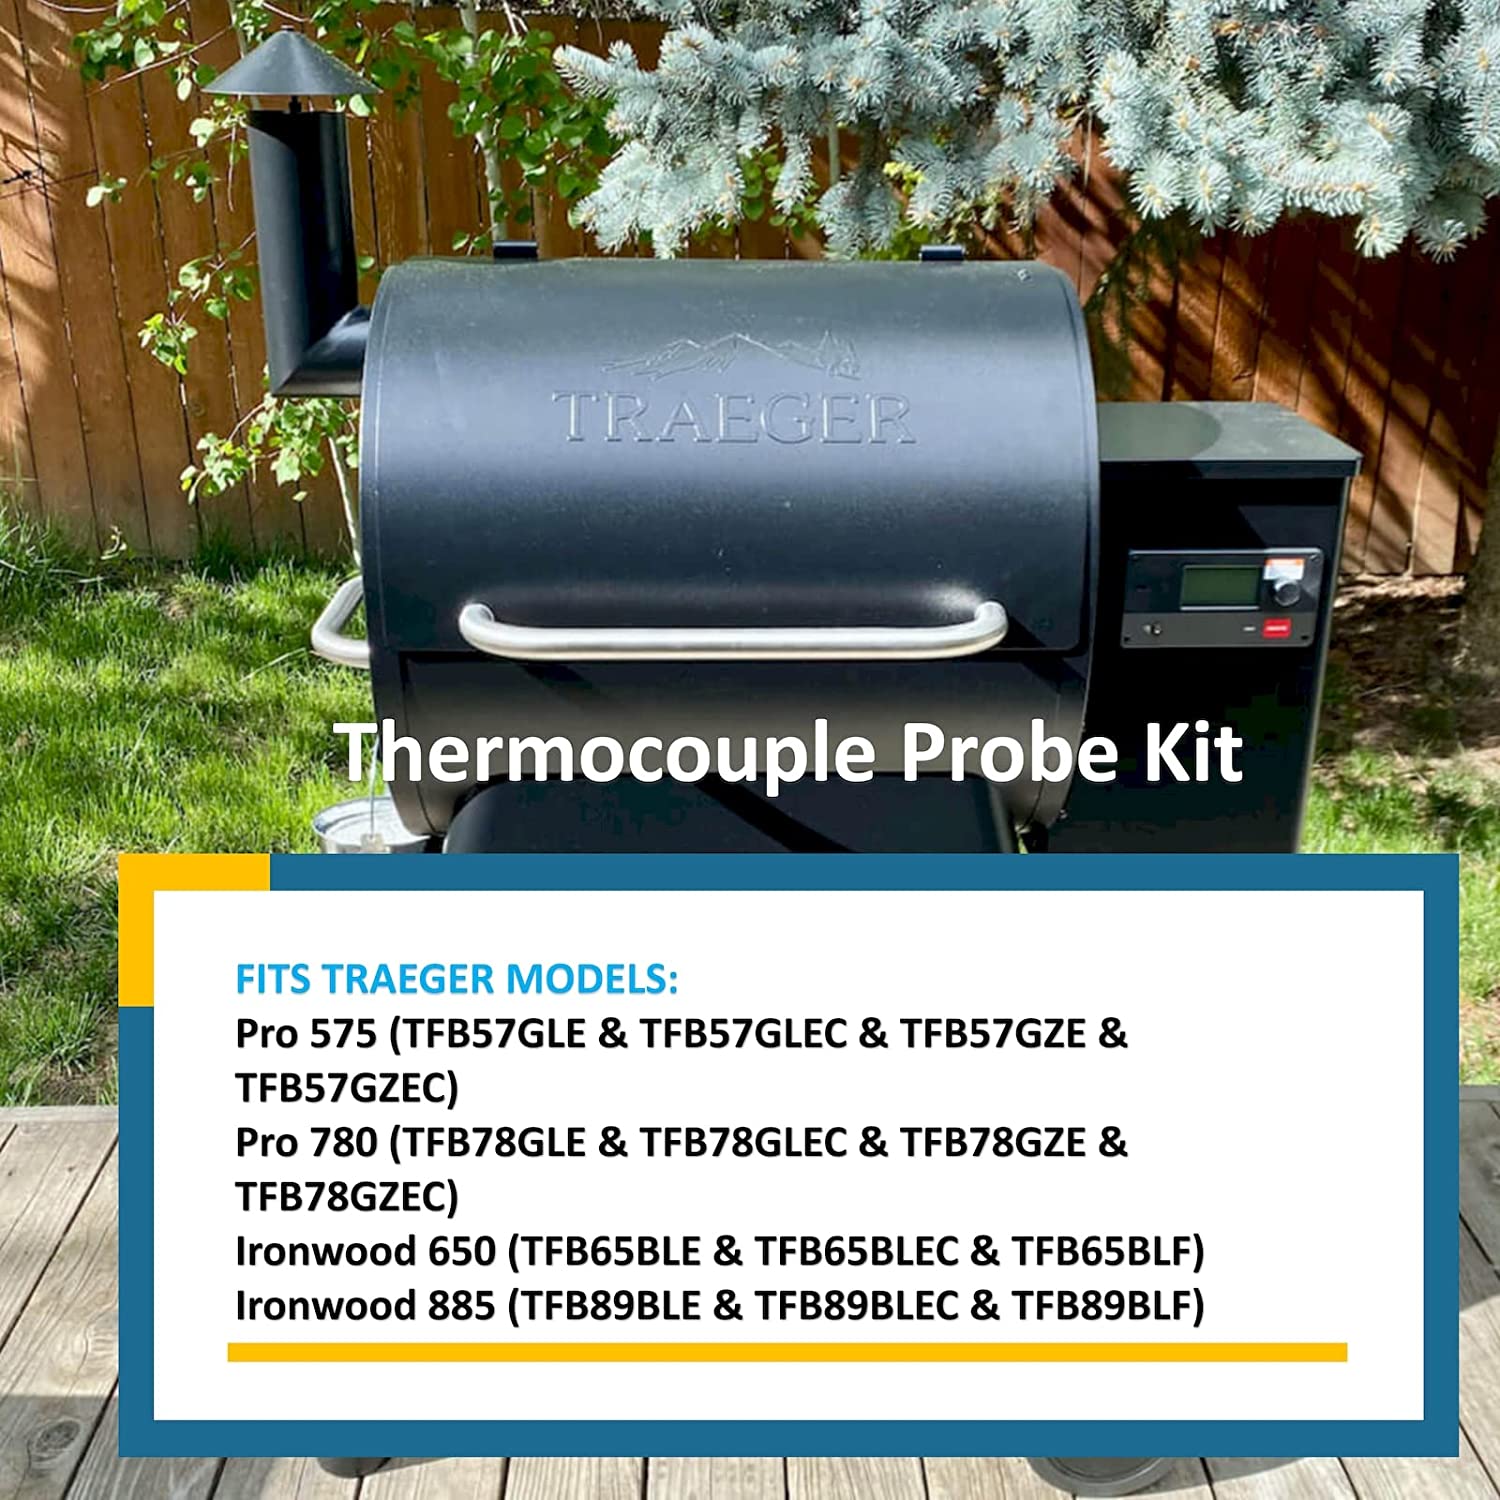 BIG PART Thermocouple Probe Kit Replacement Parts KIT0422 for Traeger D2 Pro & Ironwood Wood Pellet Grills